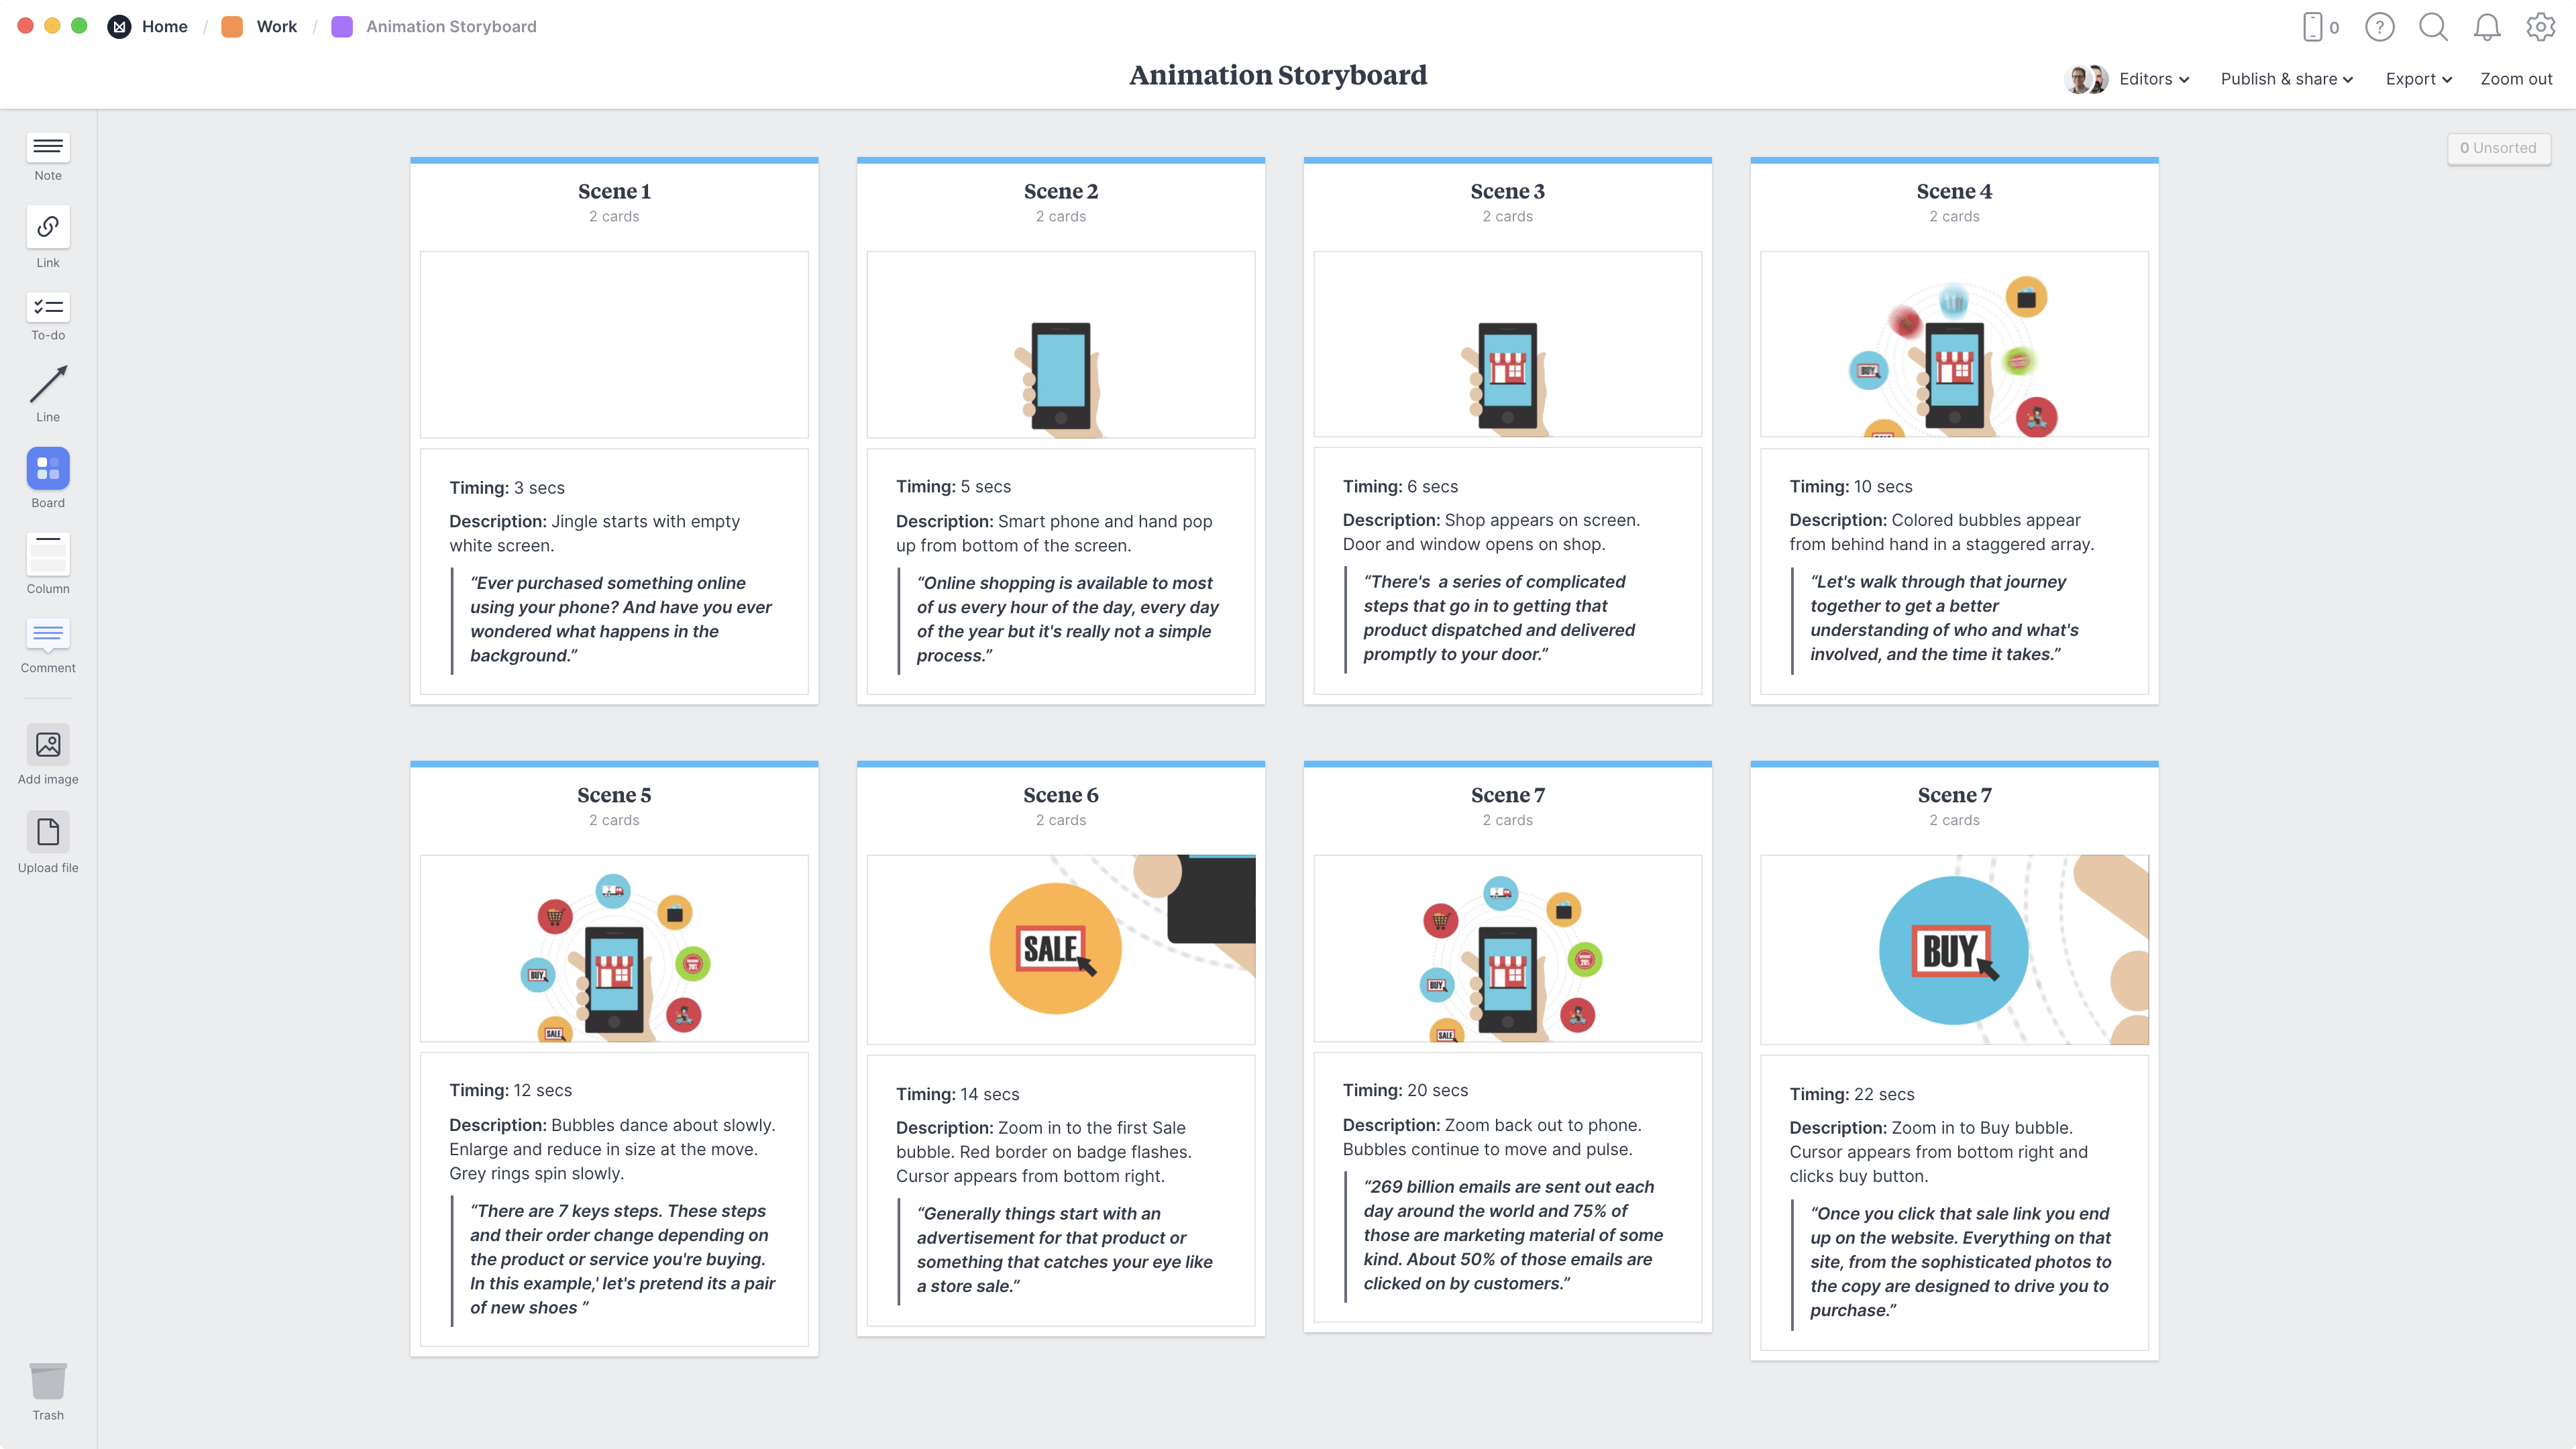 Animation Storyboard Template, within the Milanote app